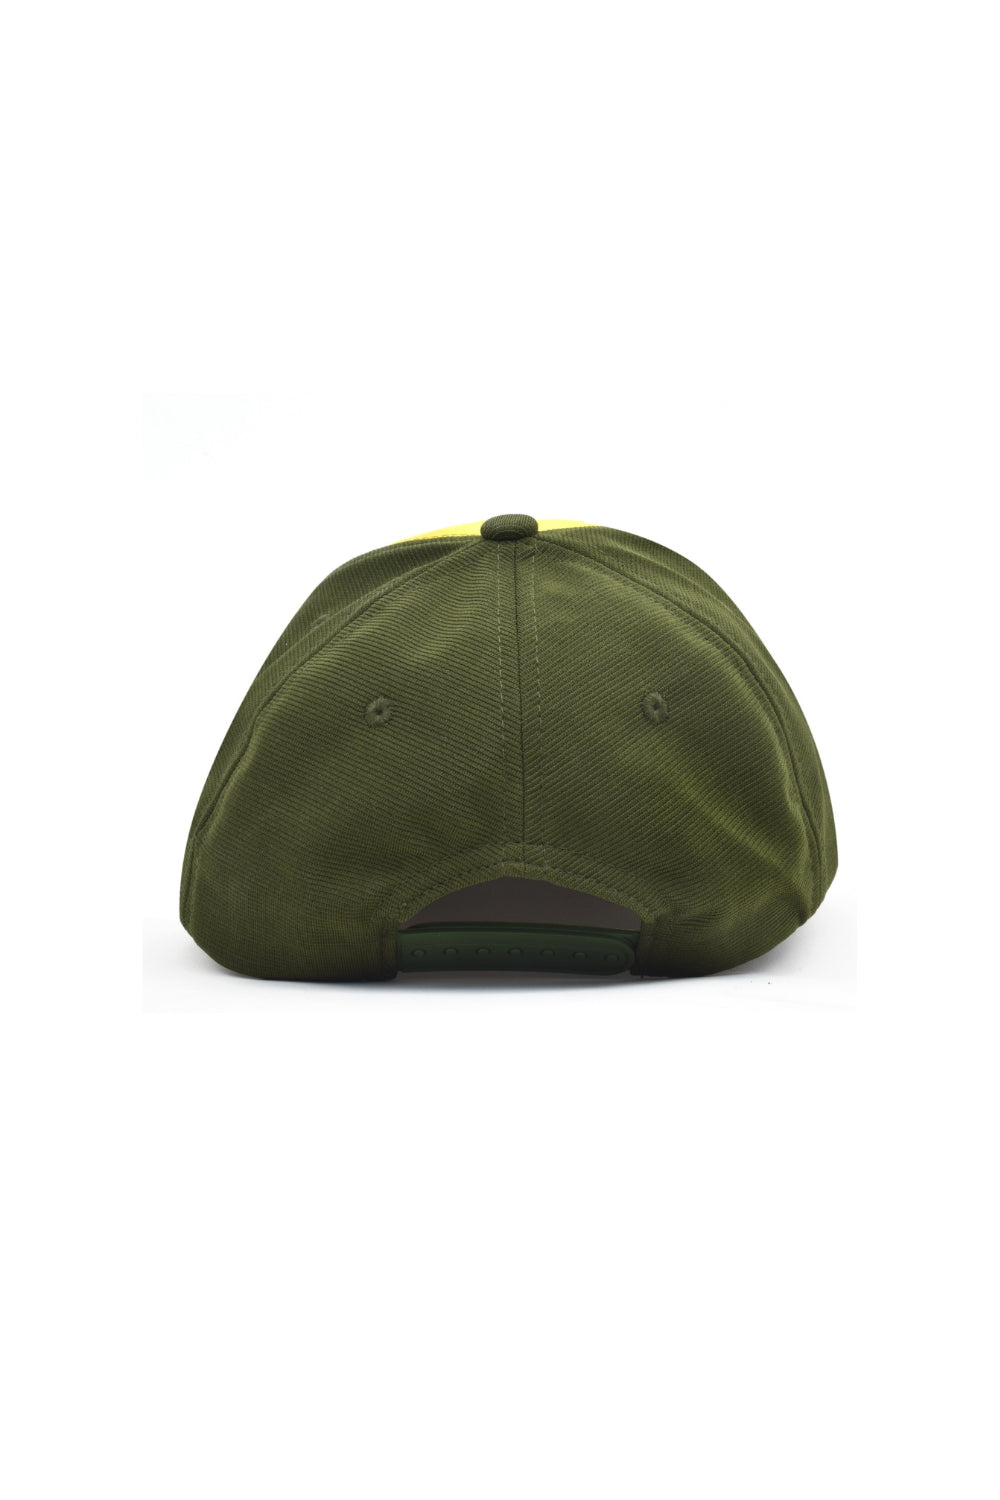 Unisex Green & Yellow Solid Baseball cap, has a visor by One Player